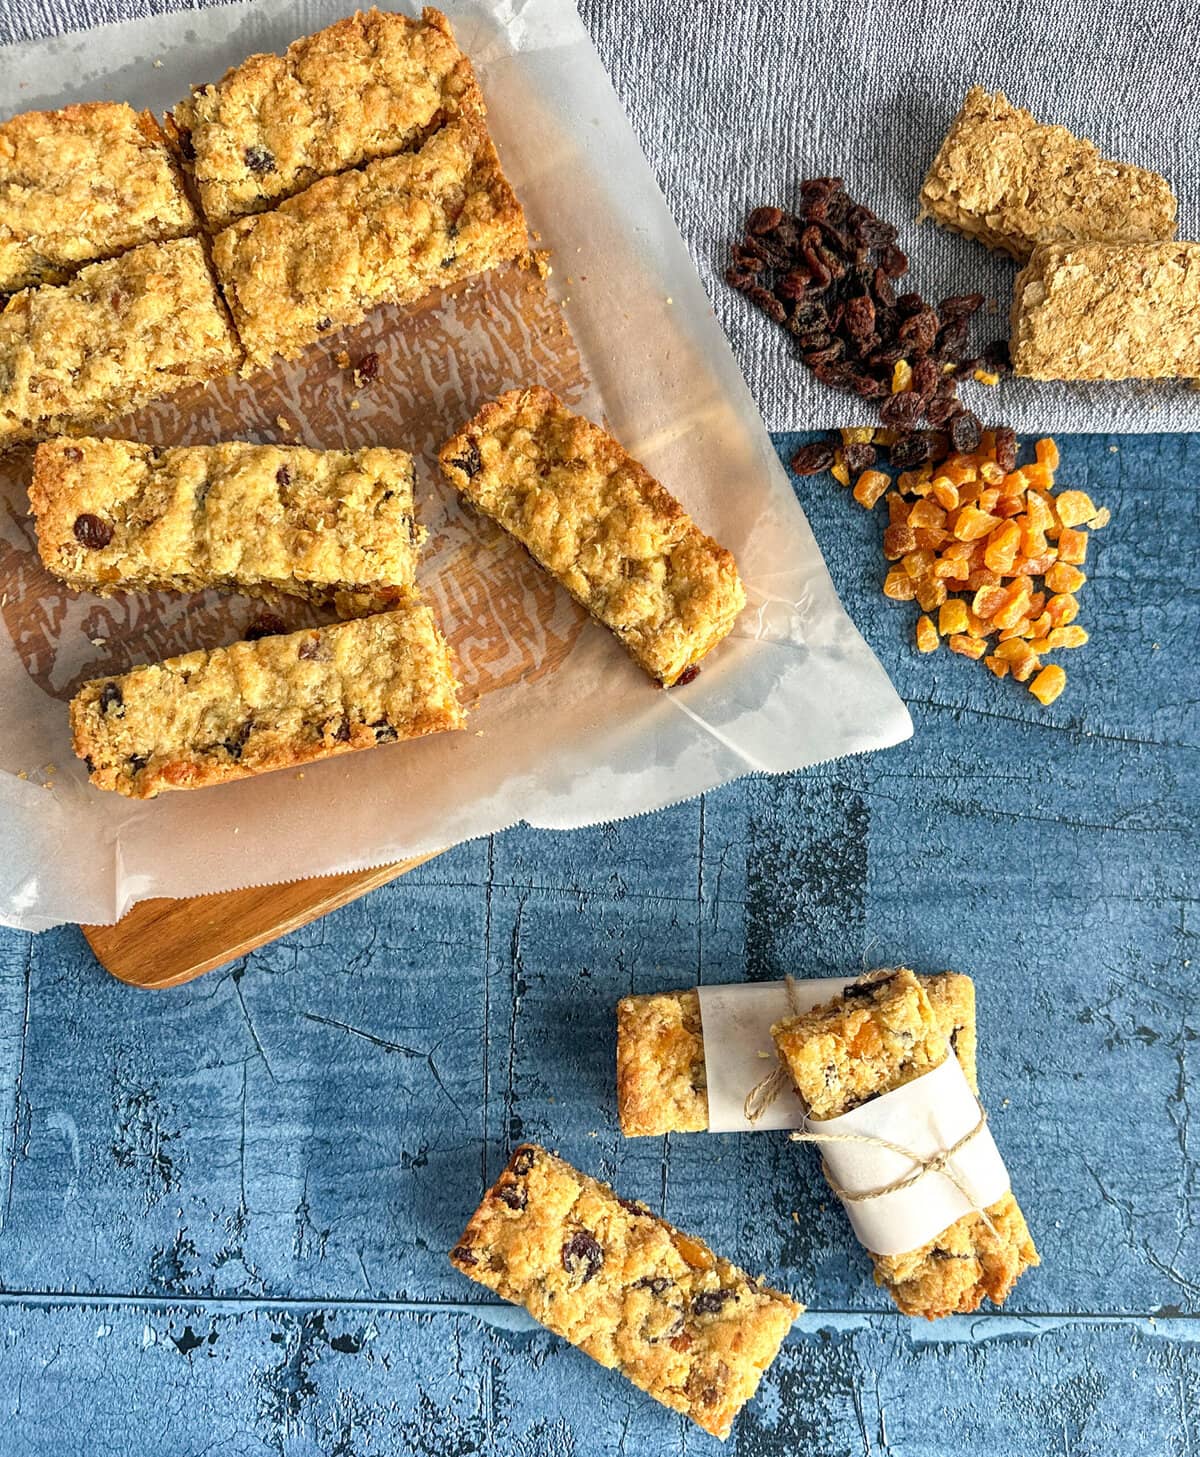 Easy Energy Muesli Bars, made with weetbix and dried fruit, sliced into bars